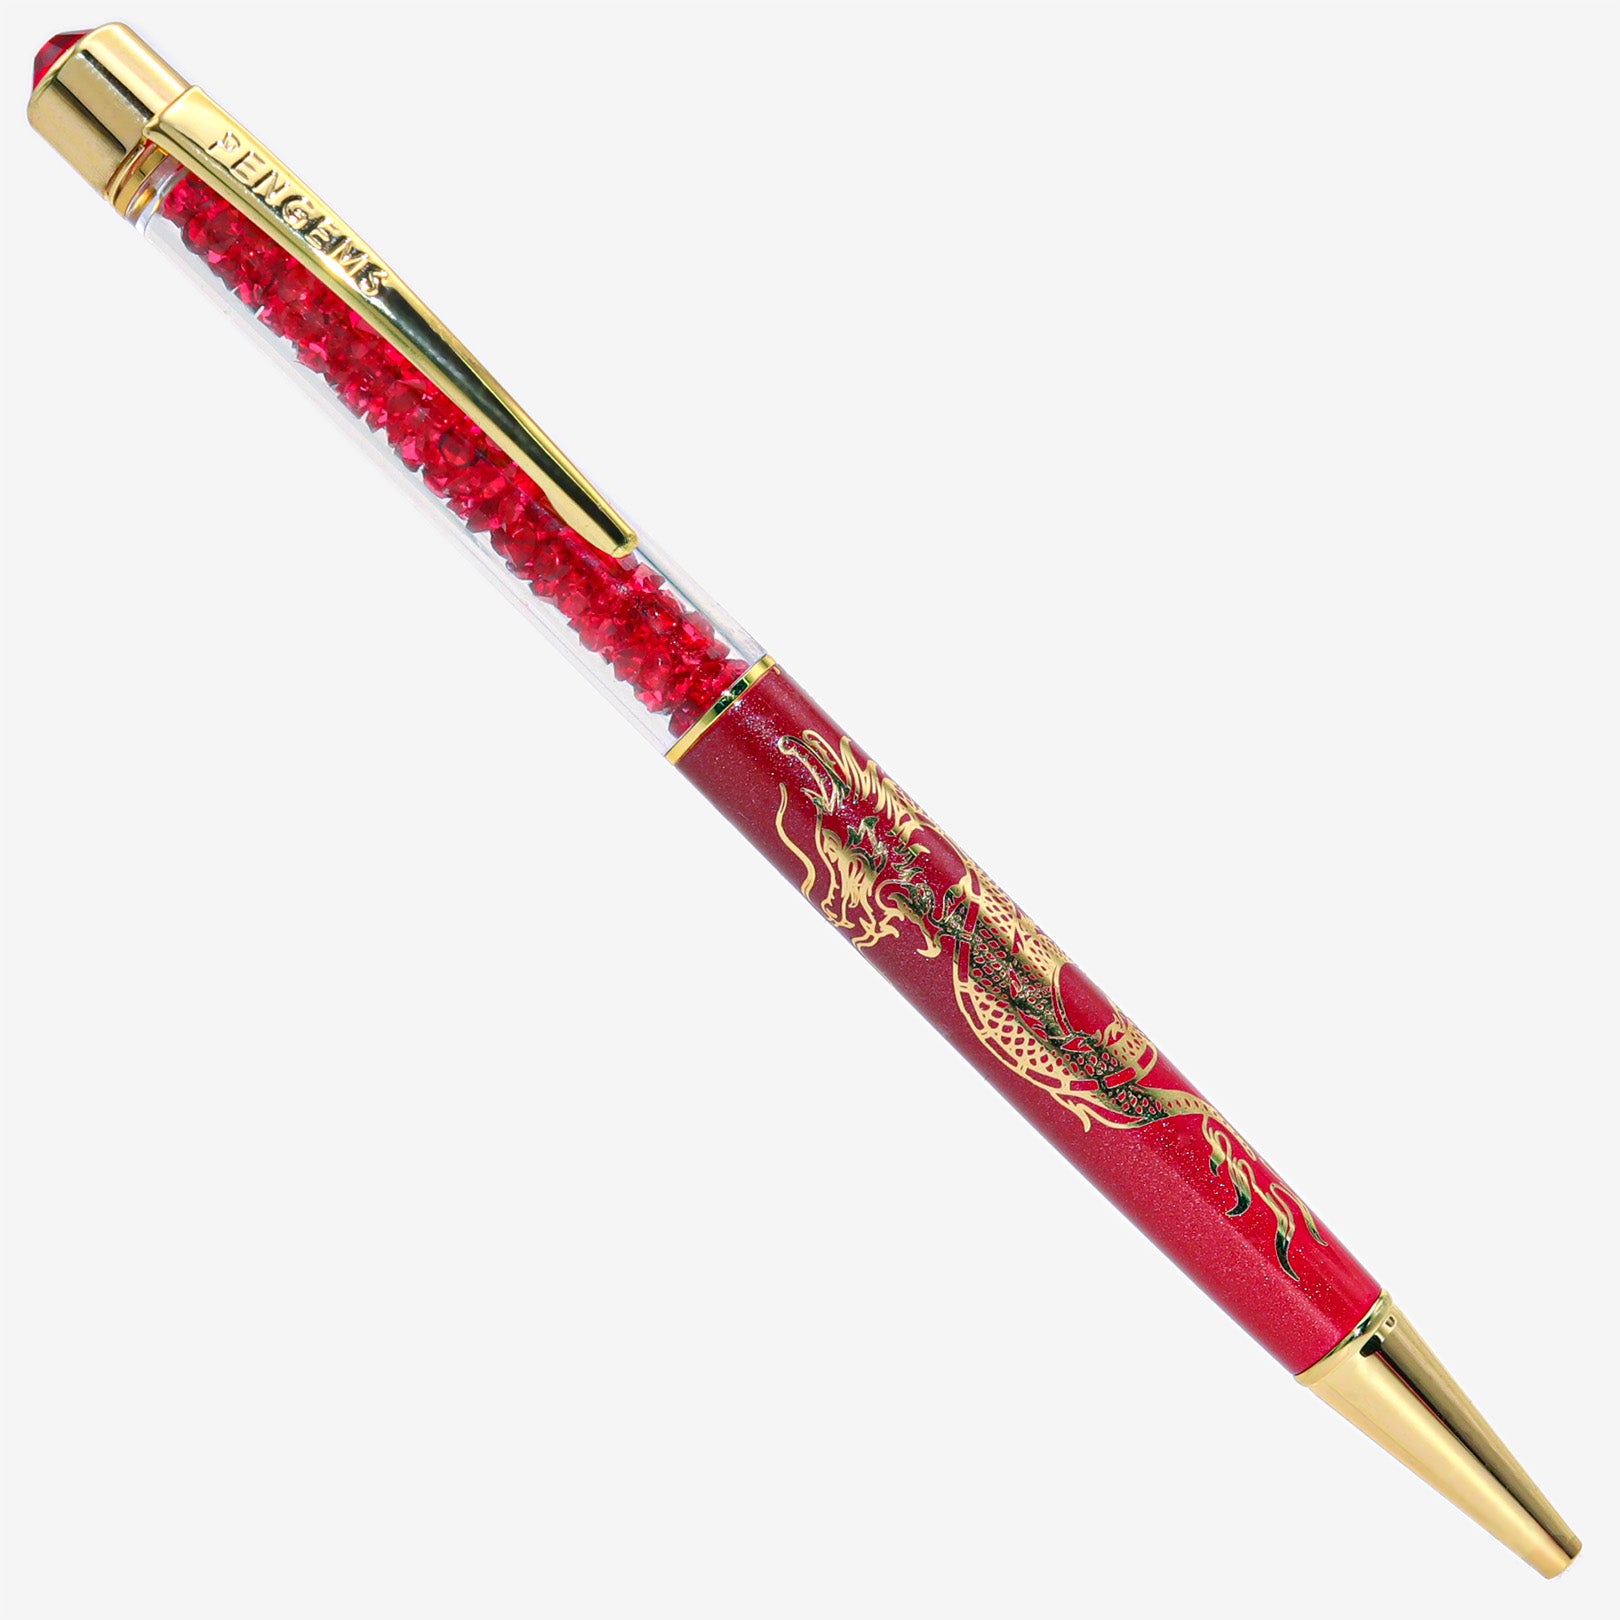 Shanghai Citypop Collection China Red Crystal Pen